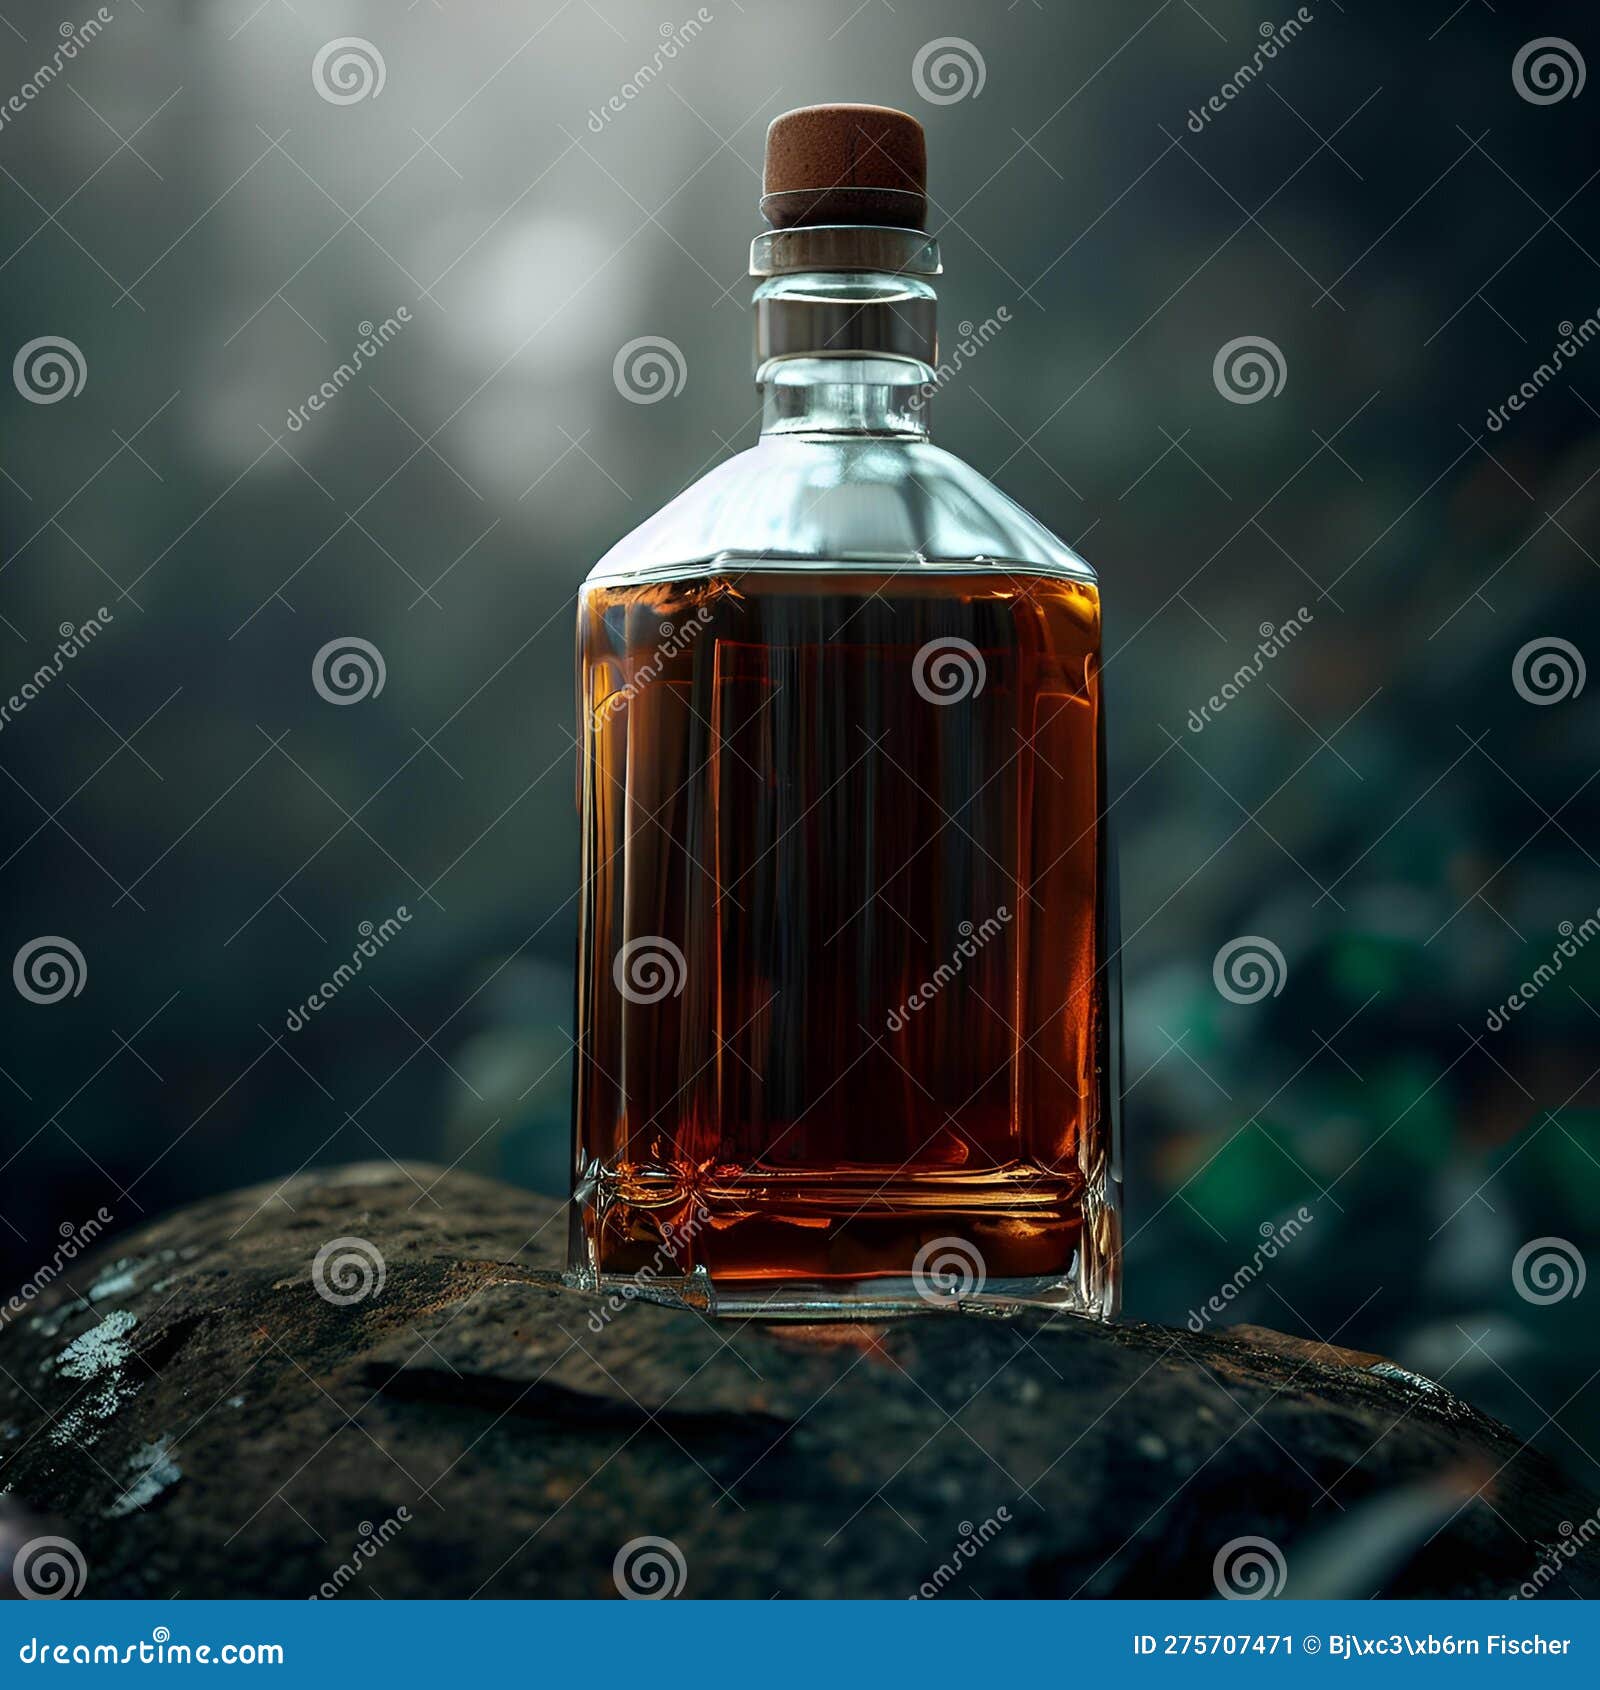 https://thumbs.dreamstime.com/z/product-shot-vintage-whiskey-bottle-standing-rock-forest-no-labels-text-brand-name-275707471.jpg